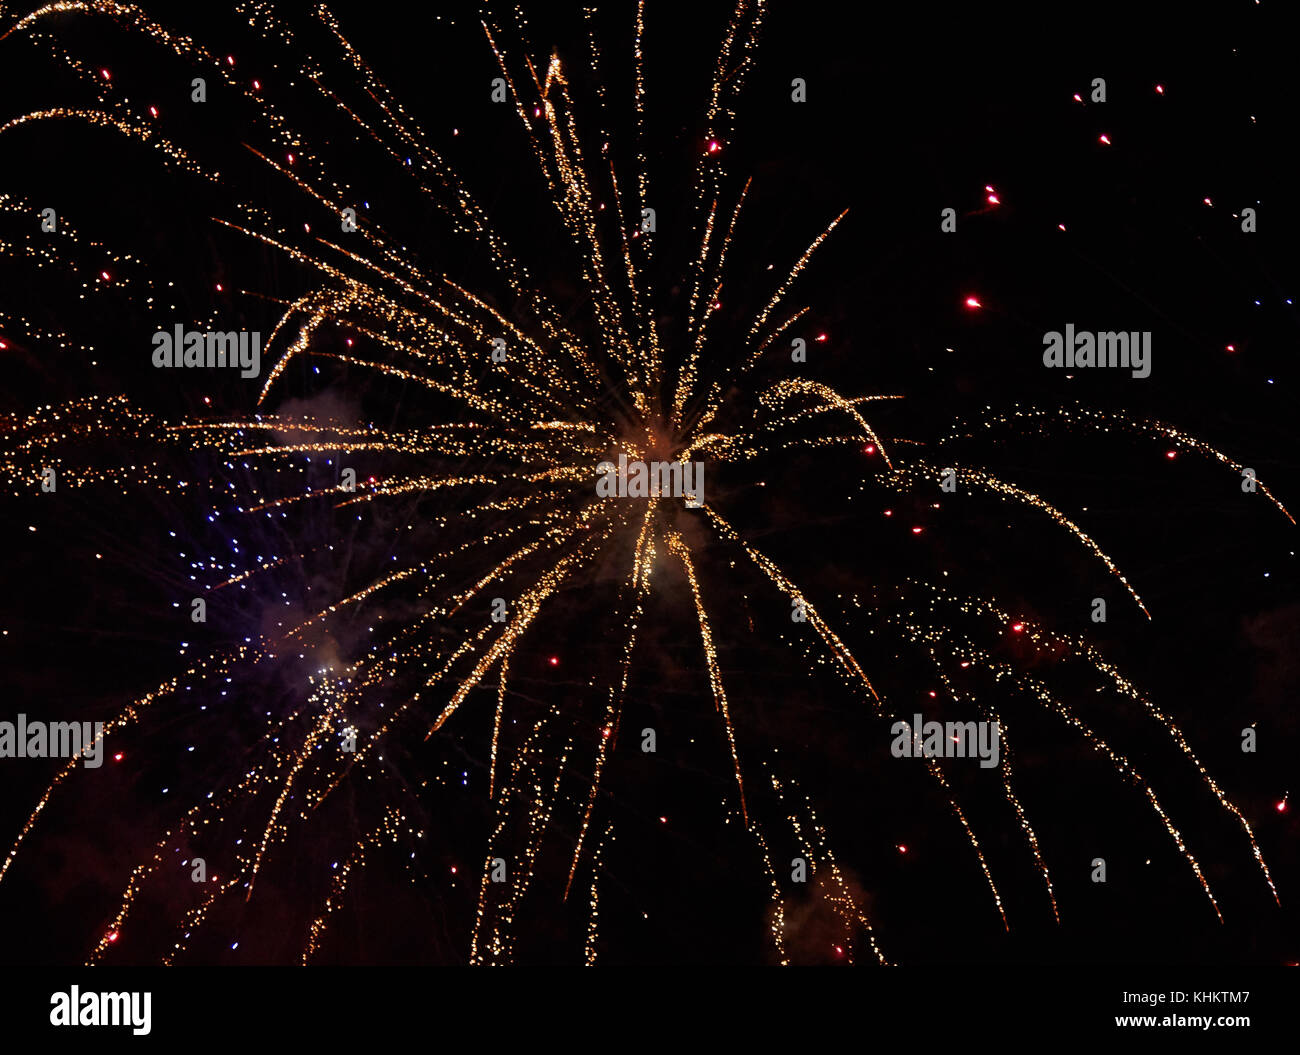 Explosion of yellow fireworks against the background of a dark night sky Stock Photo